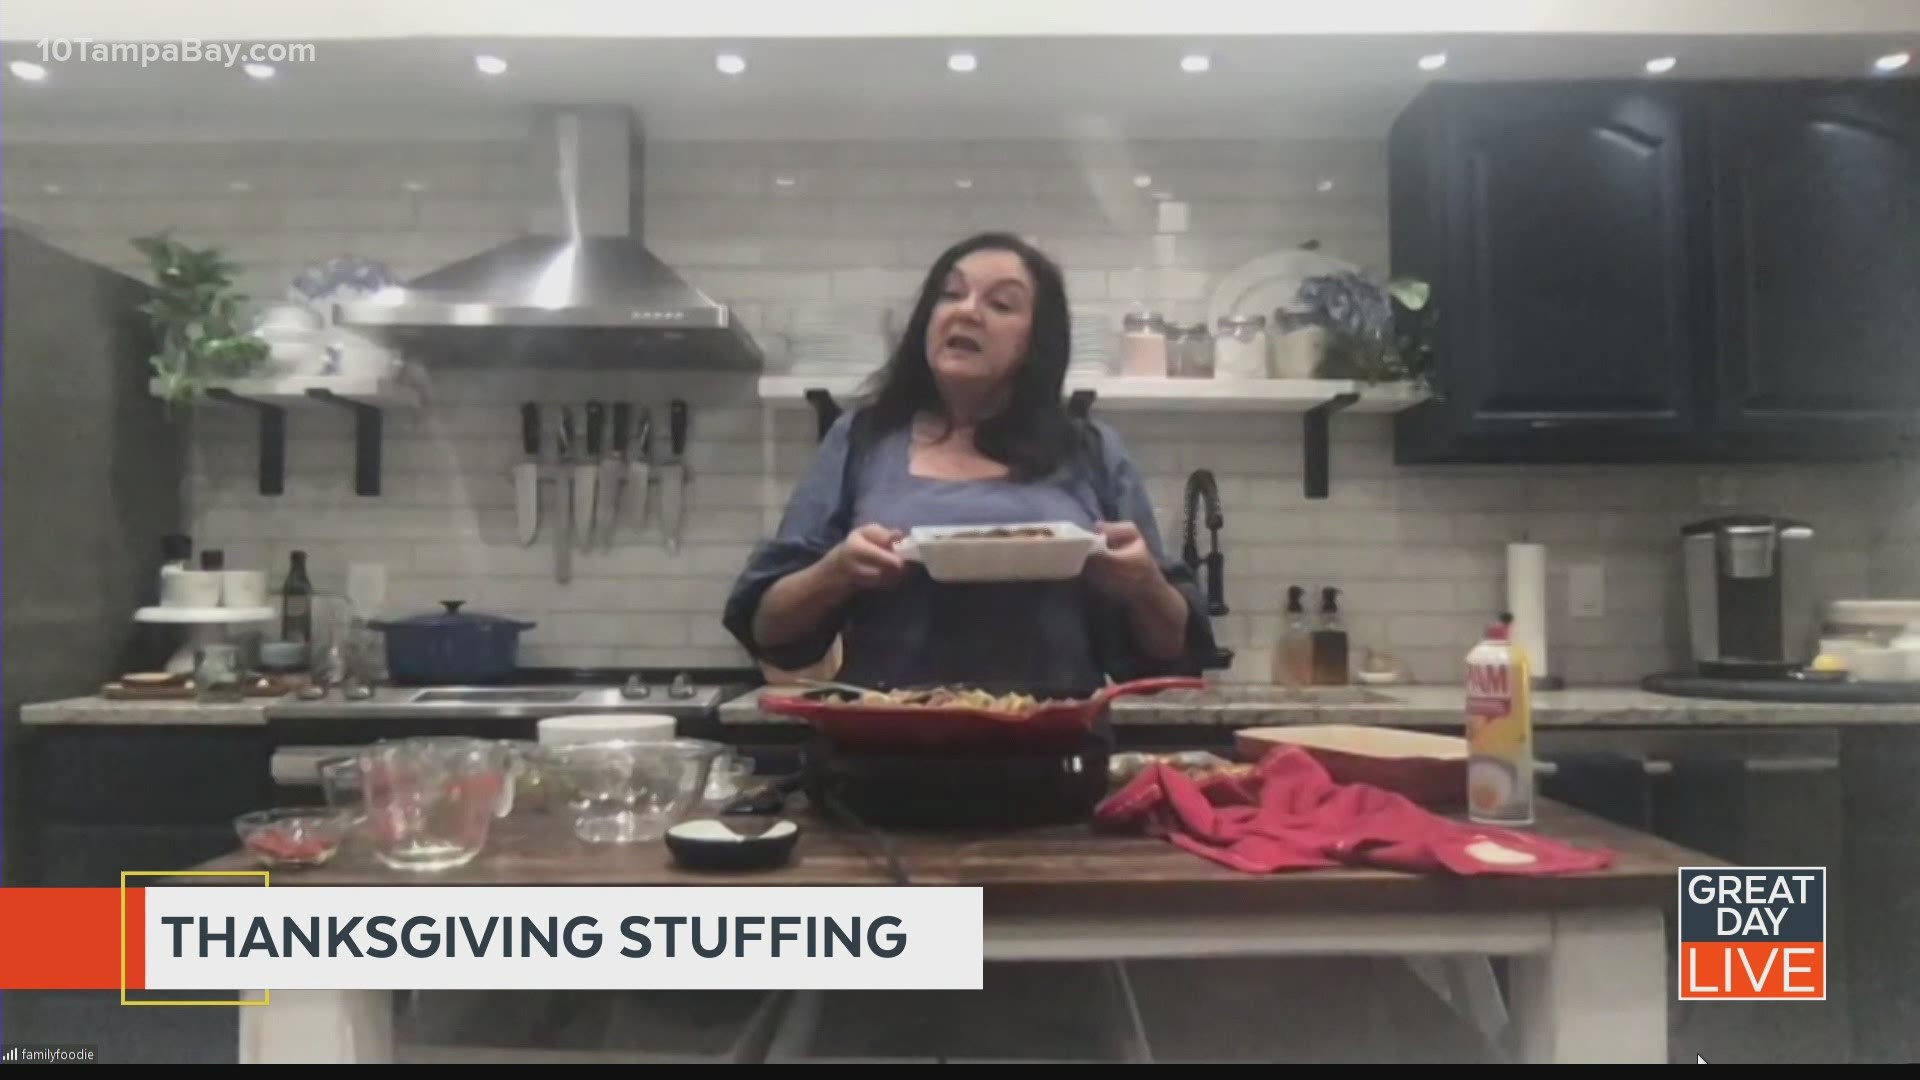 Family Foodie stuffing recipe